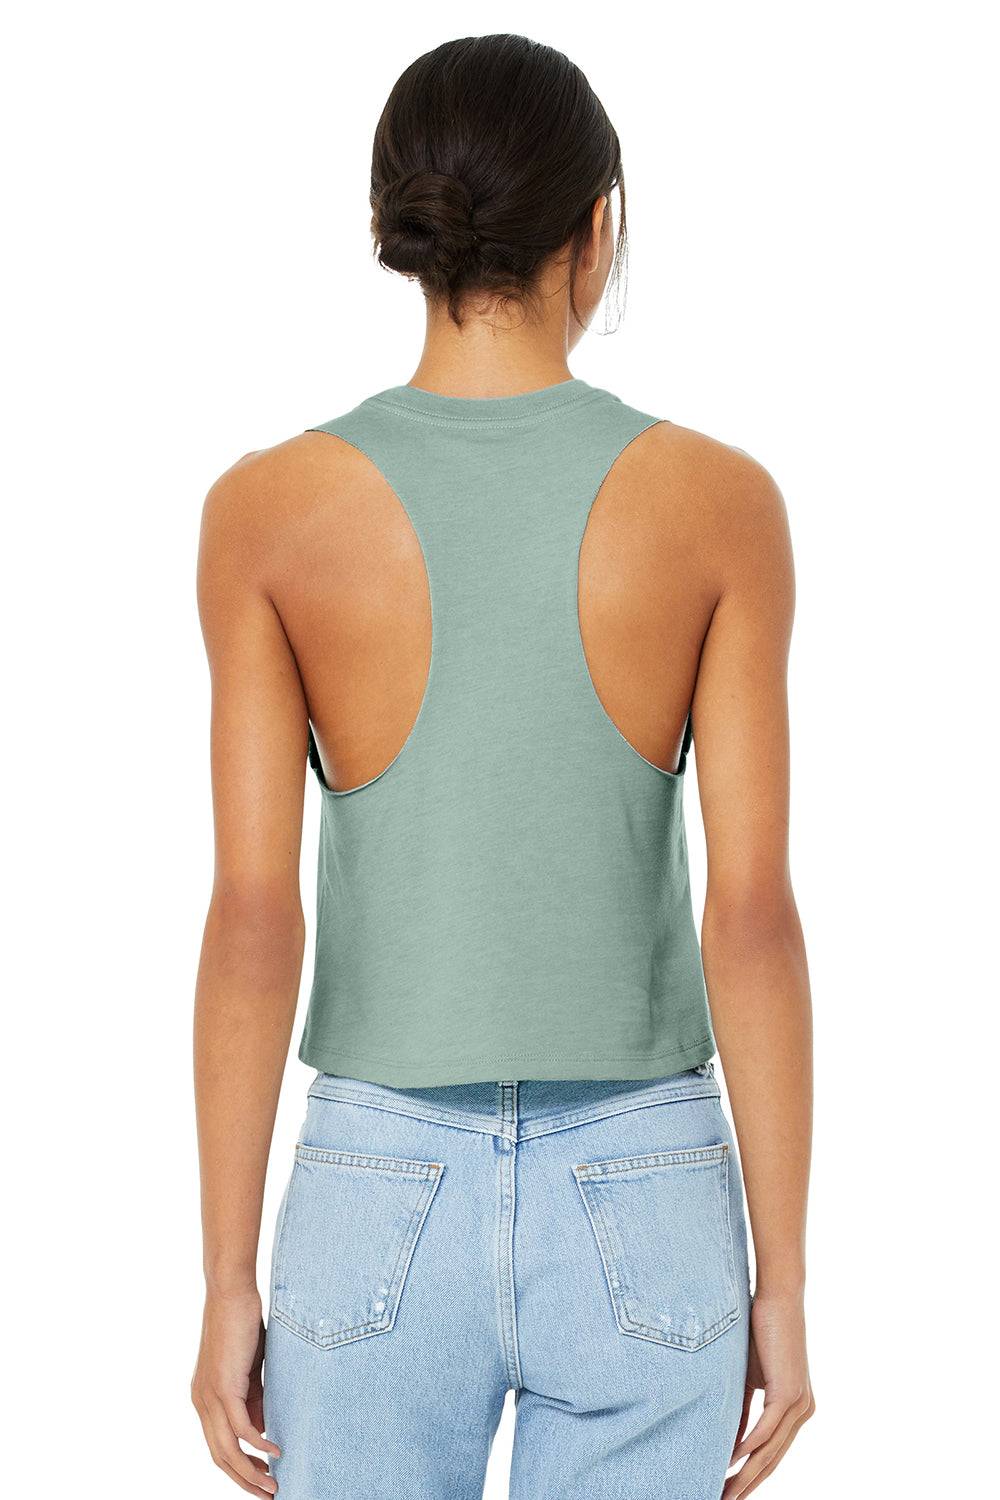 Bella + Canvas BC6682/6682 Womens Cropped Tank Top Heather Dusty Blue Model Back